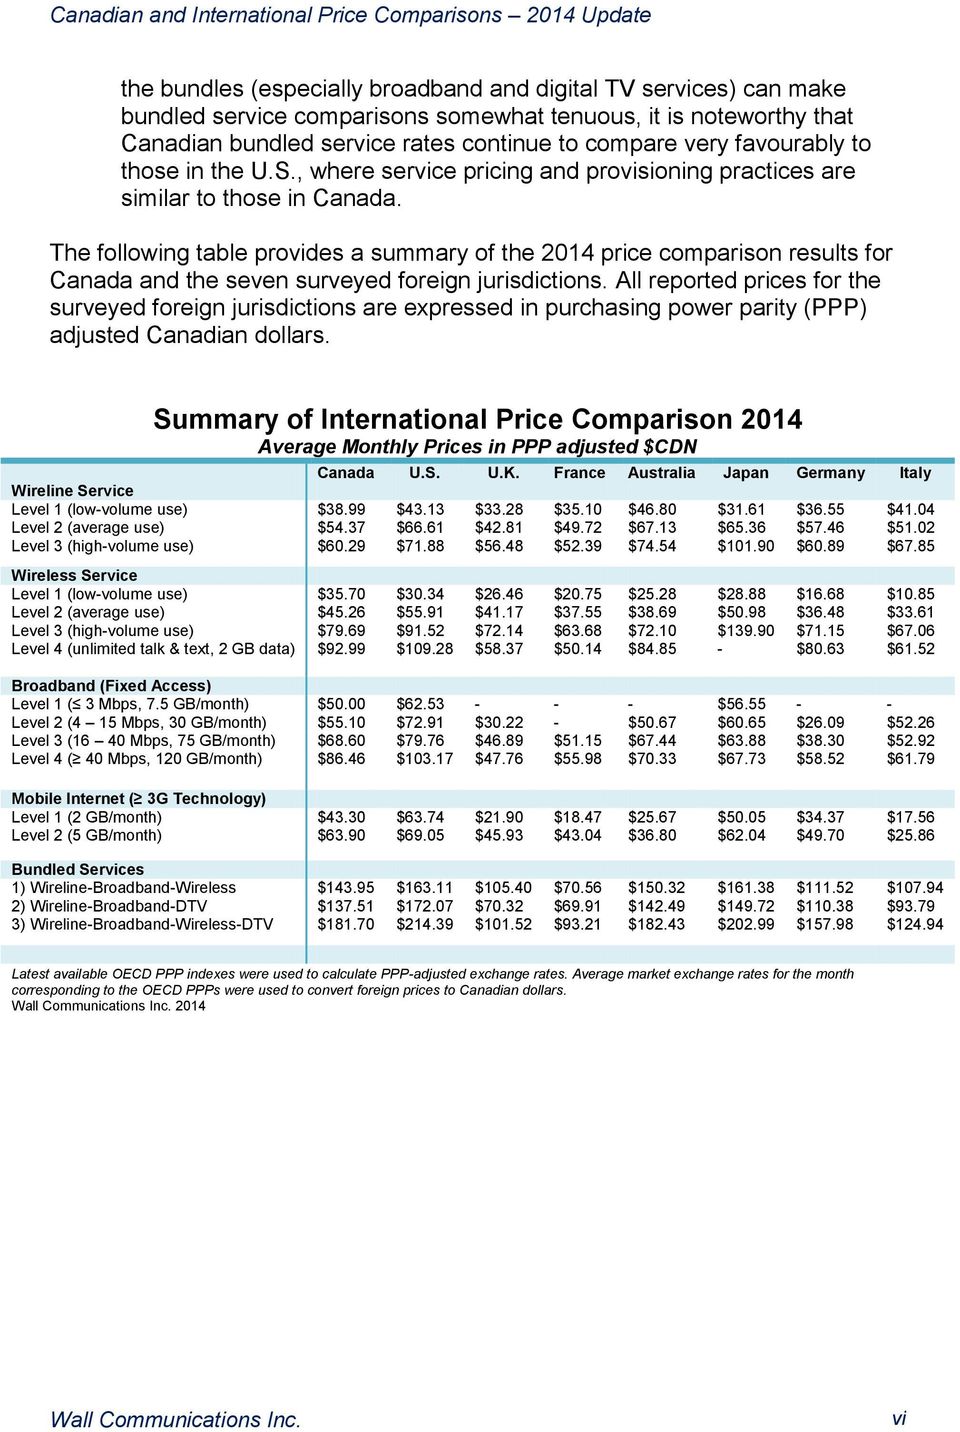 The following table provides a summary of the 2014 price comparison results for Canada and the seven surveyed foreign jurisdictions.